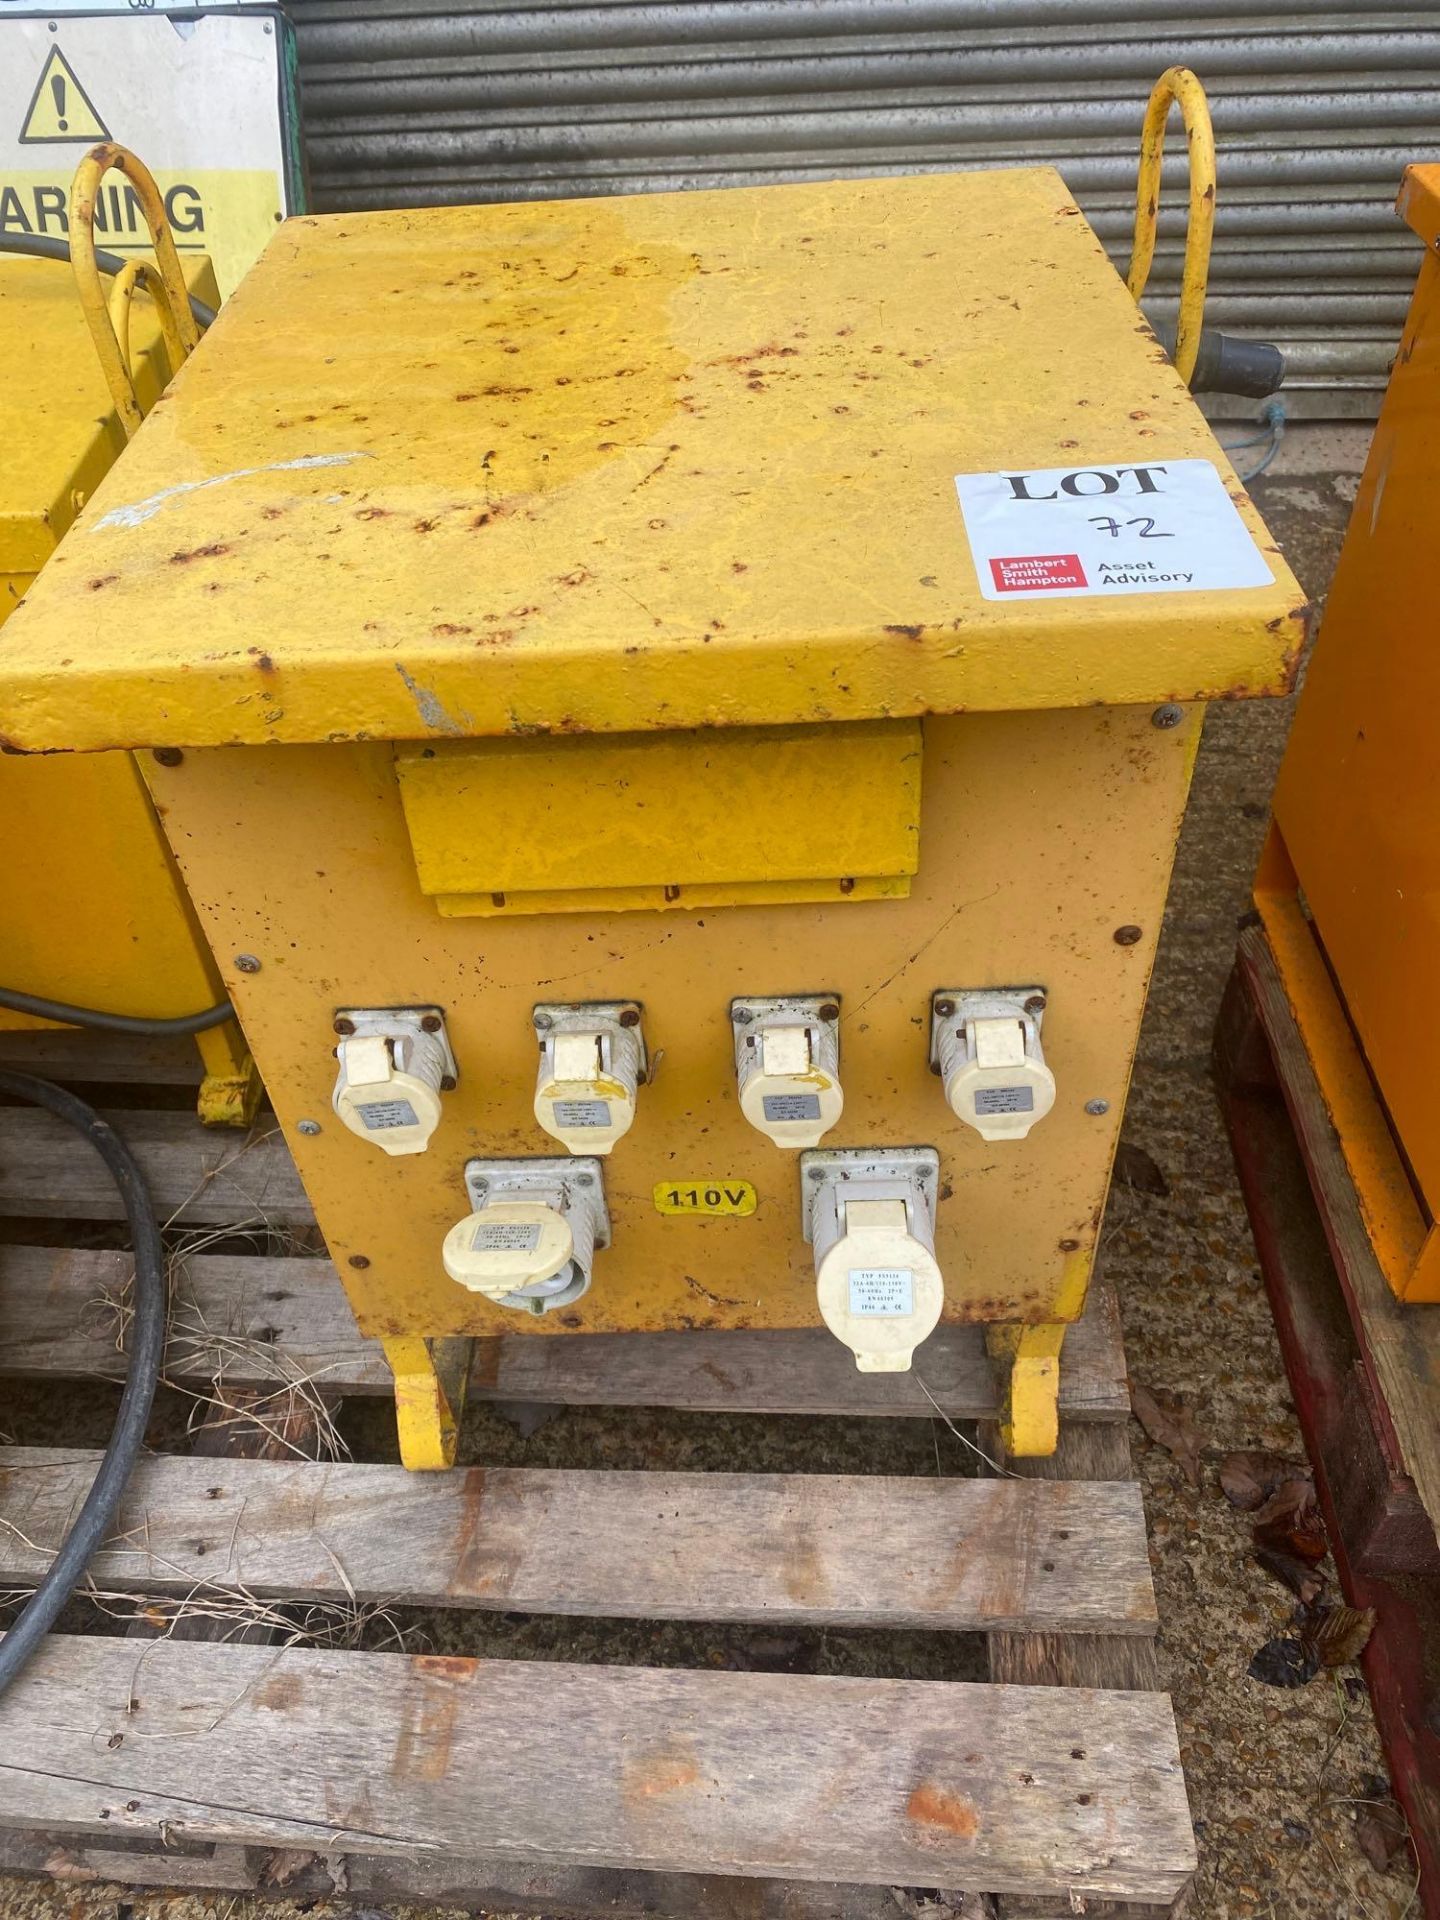 10kva site transformer with push plug outlets, 400v supply (3 phase)